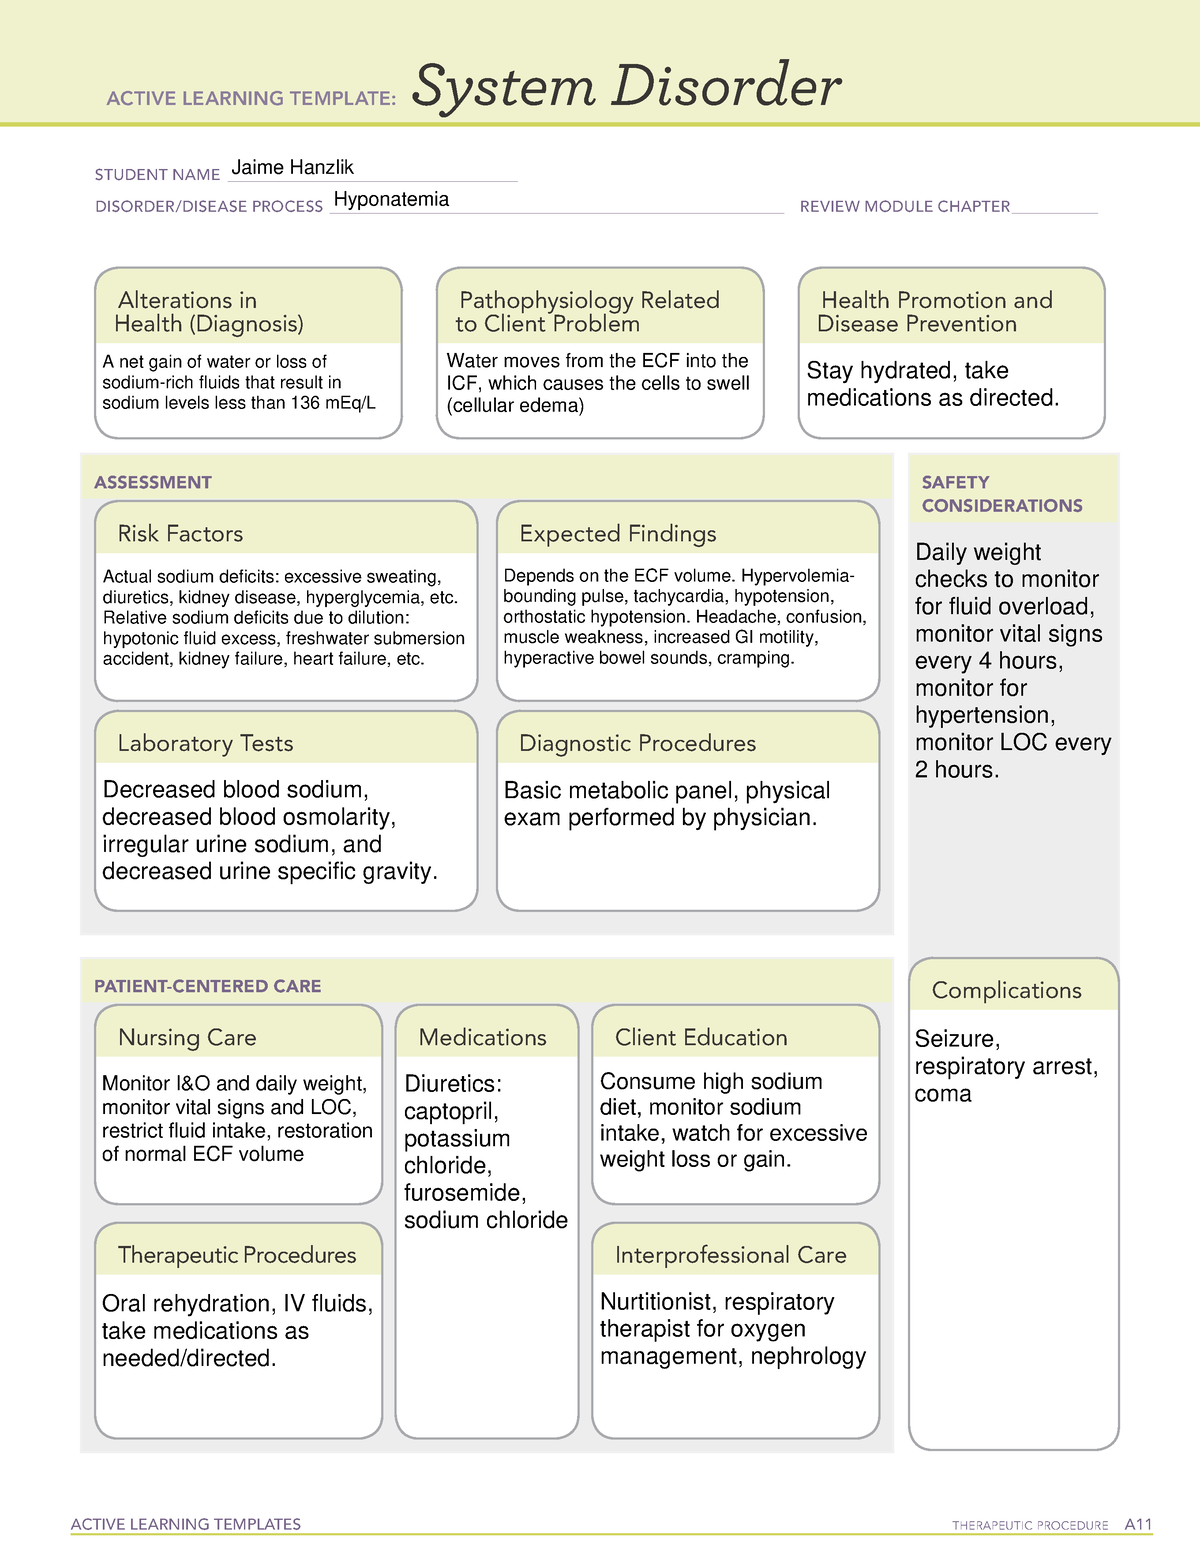 ATI System Disorder Hyponatremia - ACTIVE LEARNING TEMPLATES ...